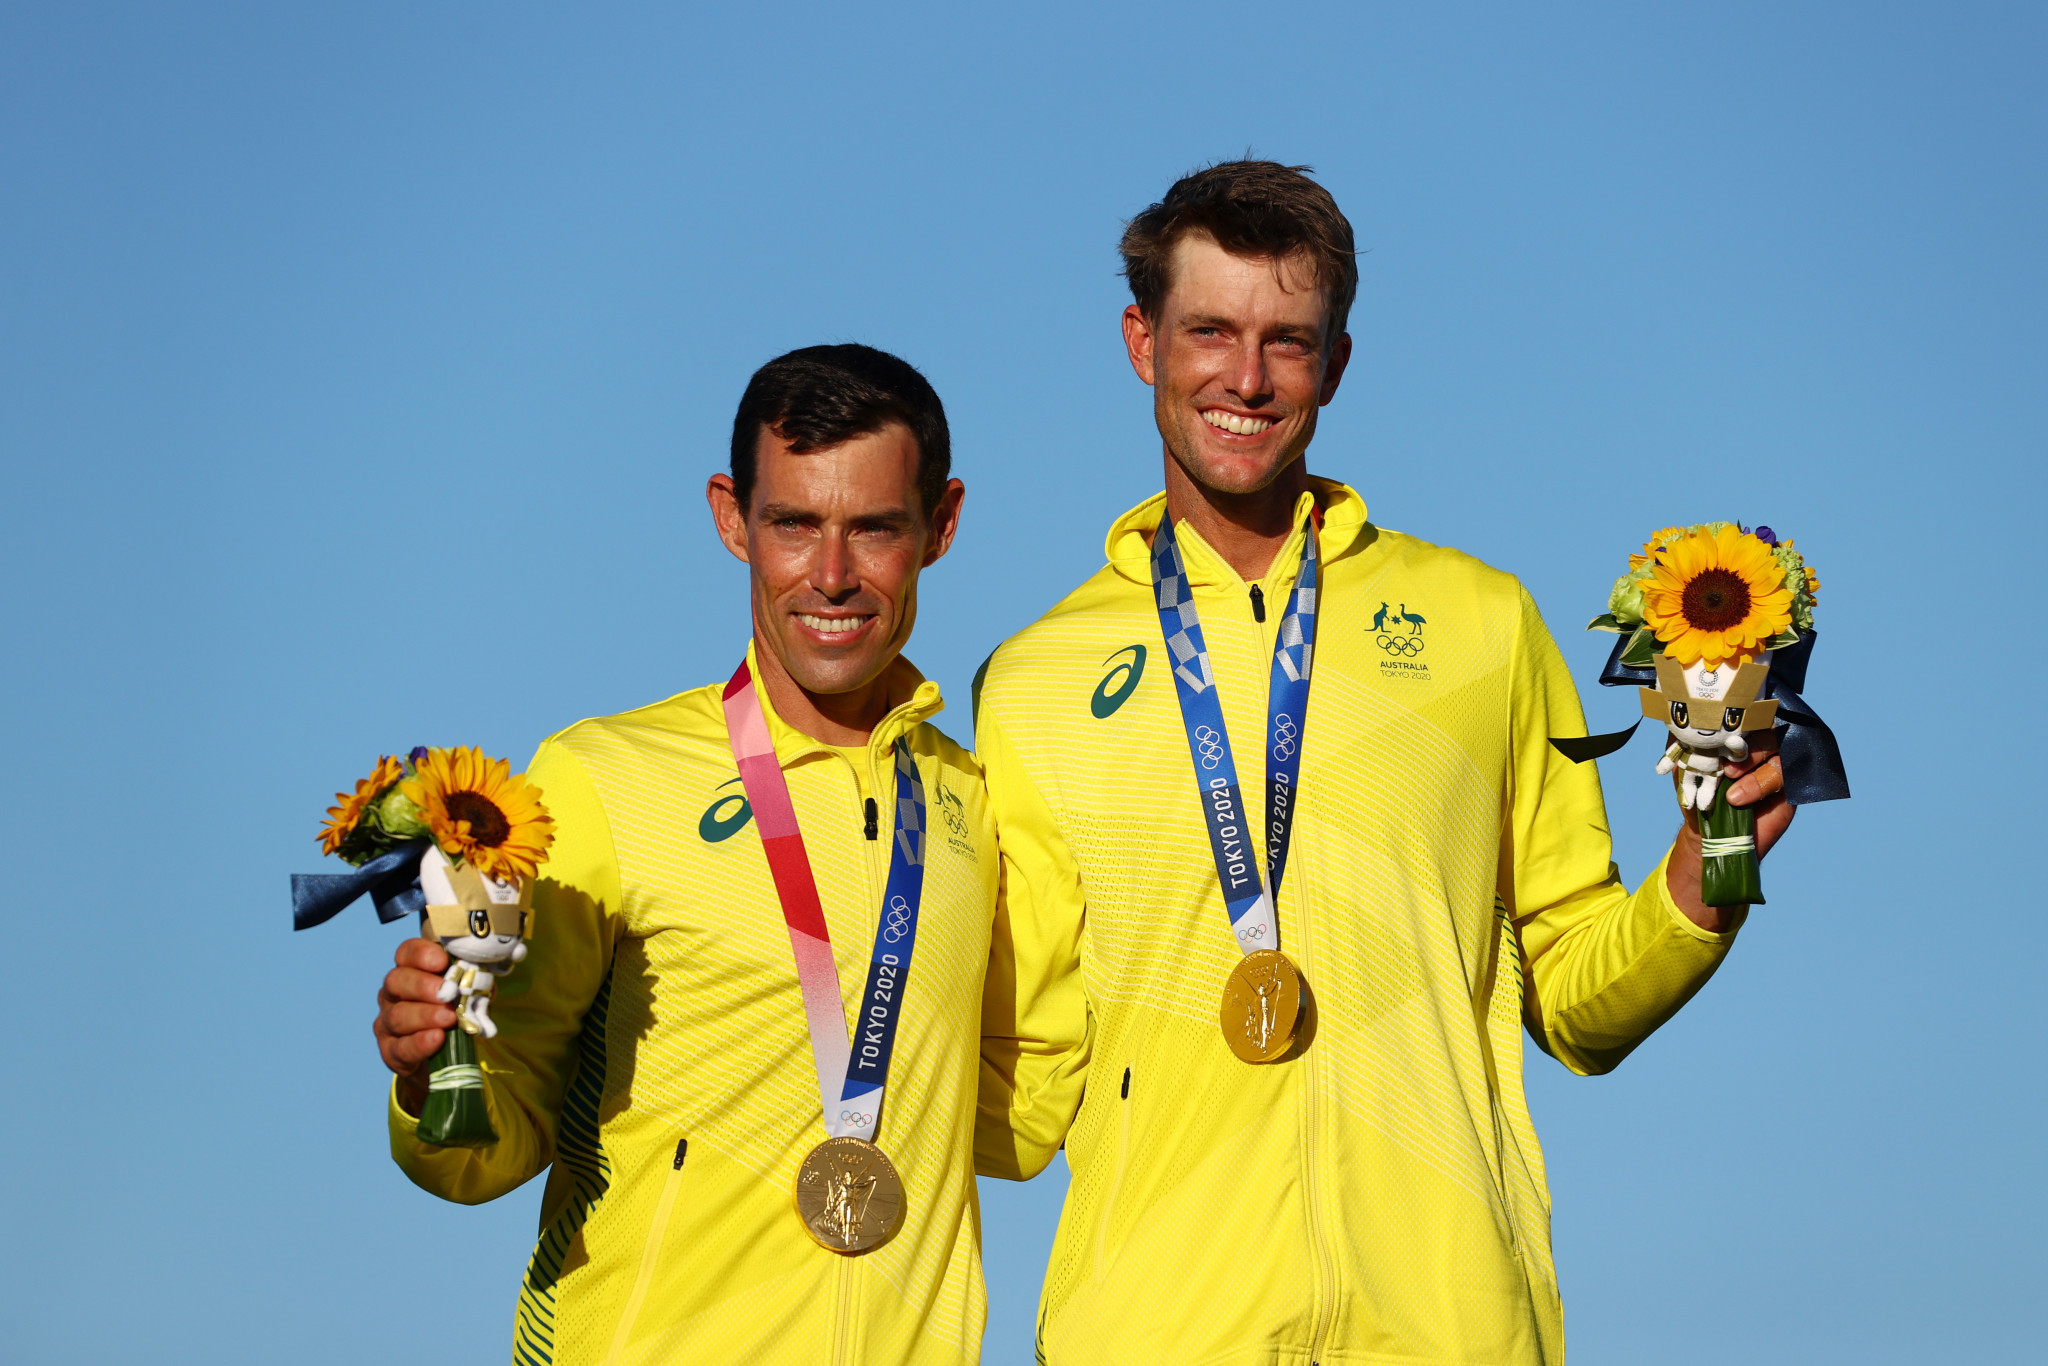 Mathew Belcher, left, won two Olympic gold medals at London 2012 and Tokyo 2020 ©Getty Images